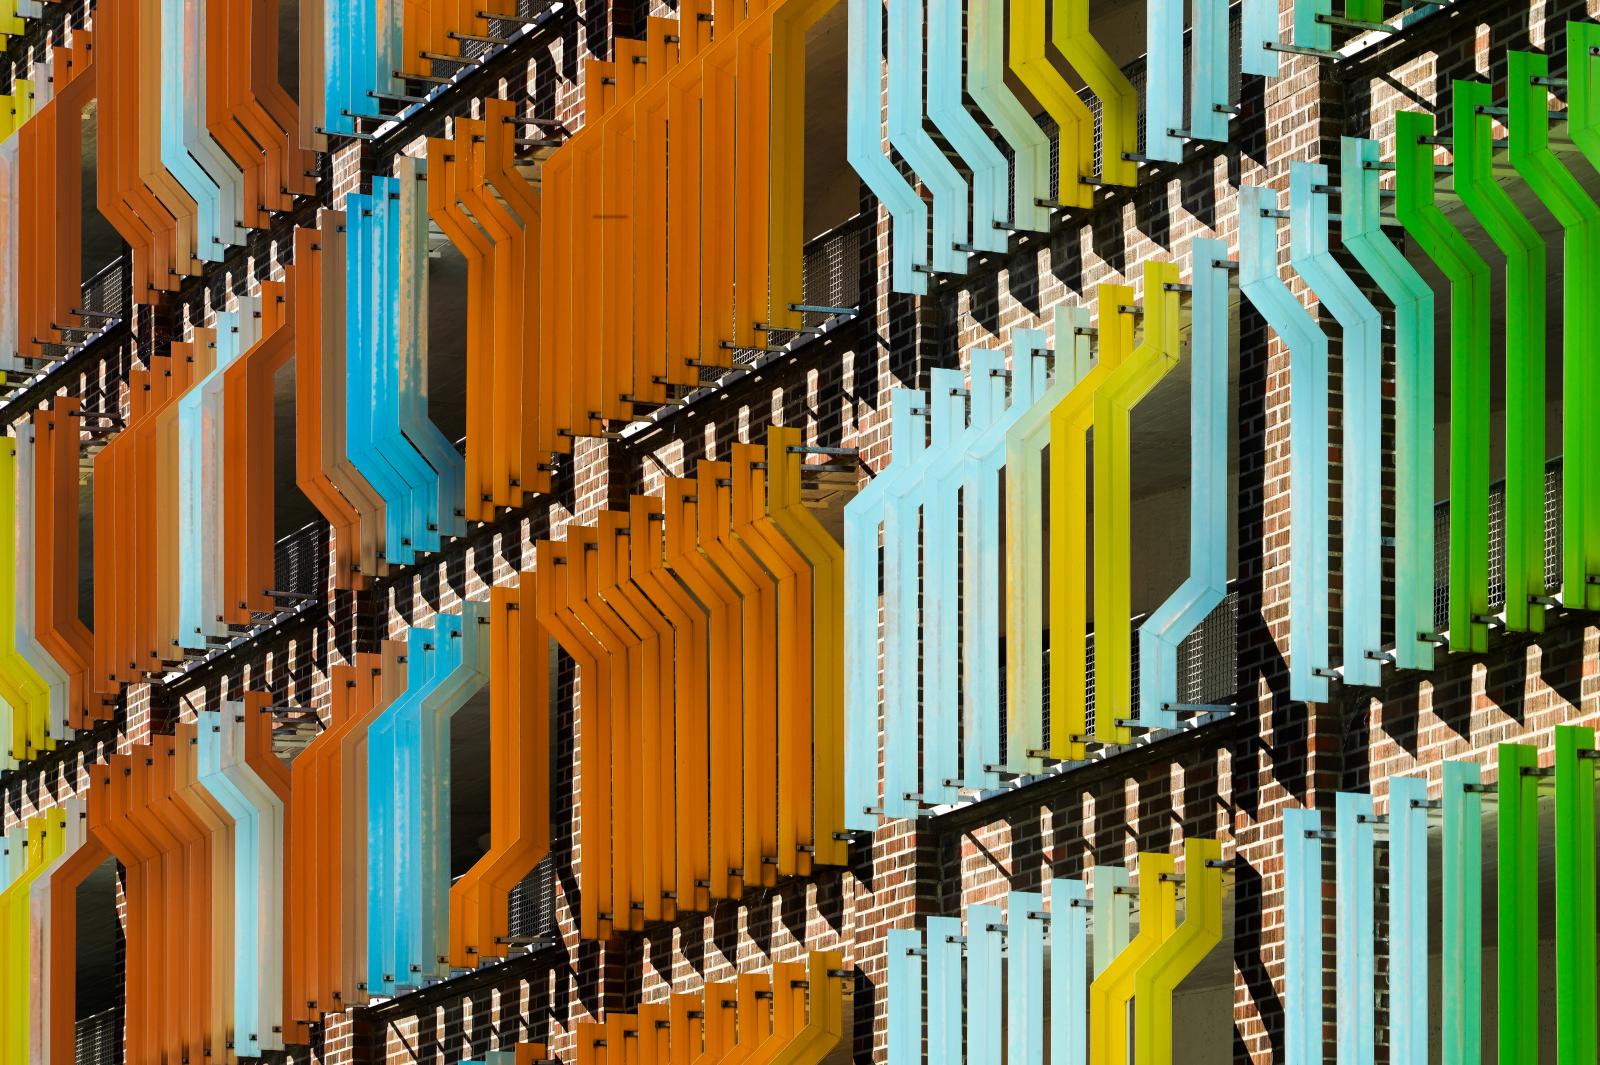 Colorful Layers: Architectural Rhythms | Buy this image